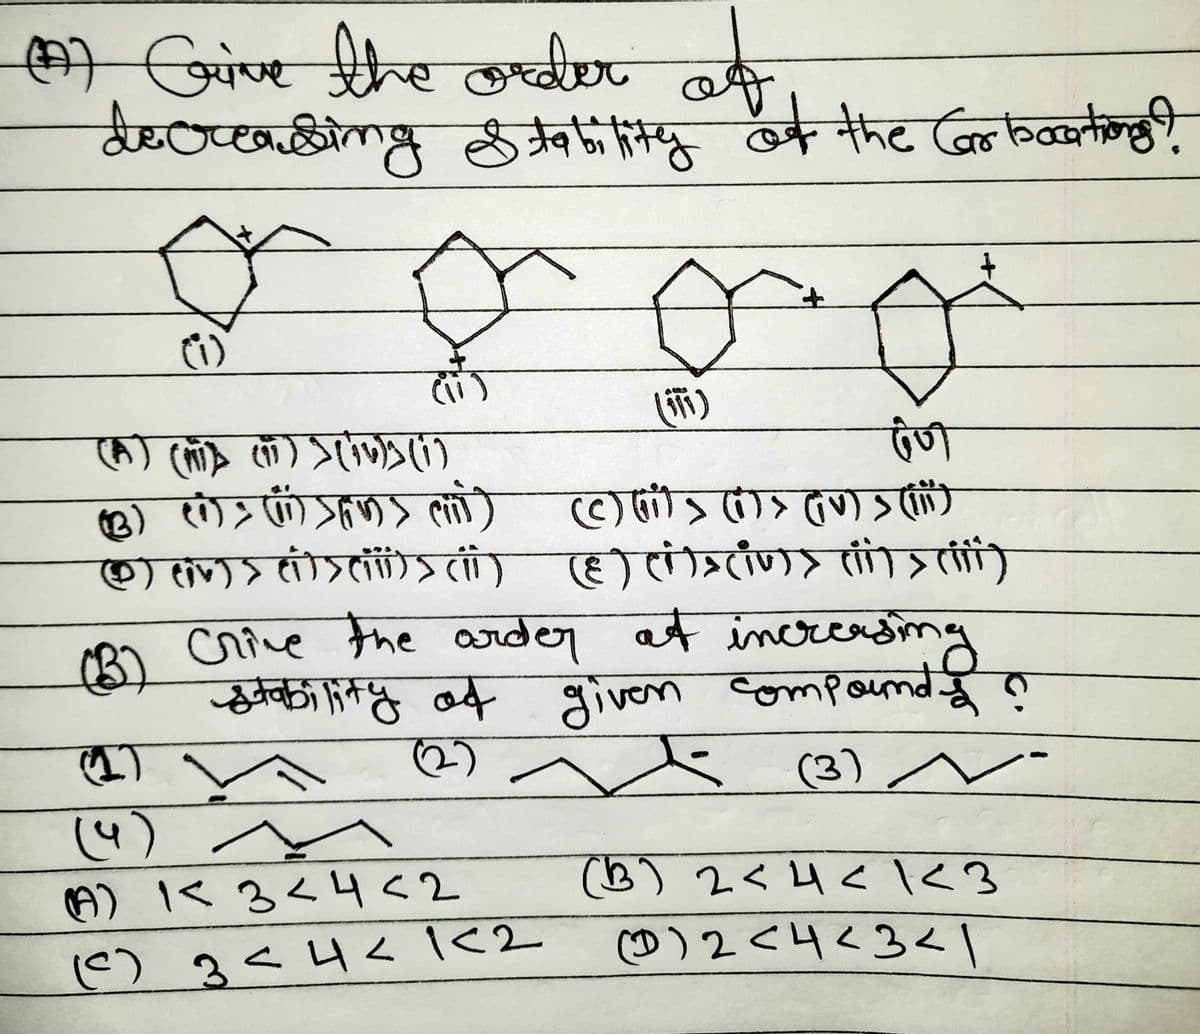 (M) Give the dr
of
decreasing Stability of the Carbocations?
(1)
210493
(A) (MI) (17) (1)
(3) (i) (i)>> (ii)
(iv)(iii)()()(
(क)
+
ल)
(५)
(A) 1< 3 < 4 <2
(C) 3<पर 102
(171)
देणी
(ciliv) 3 (iii)
(3) Crive the order at increasing
stability of given compounds ?
(2)
6 (3)
(3) 2<4<123
(D) 204<3रा